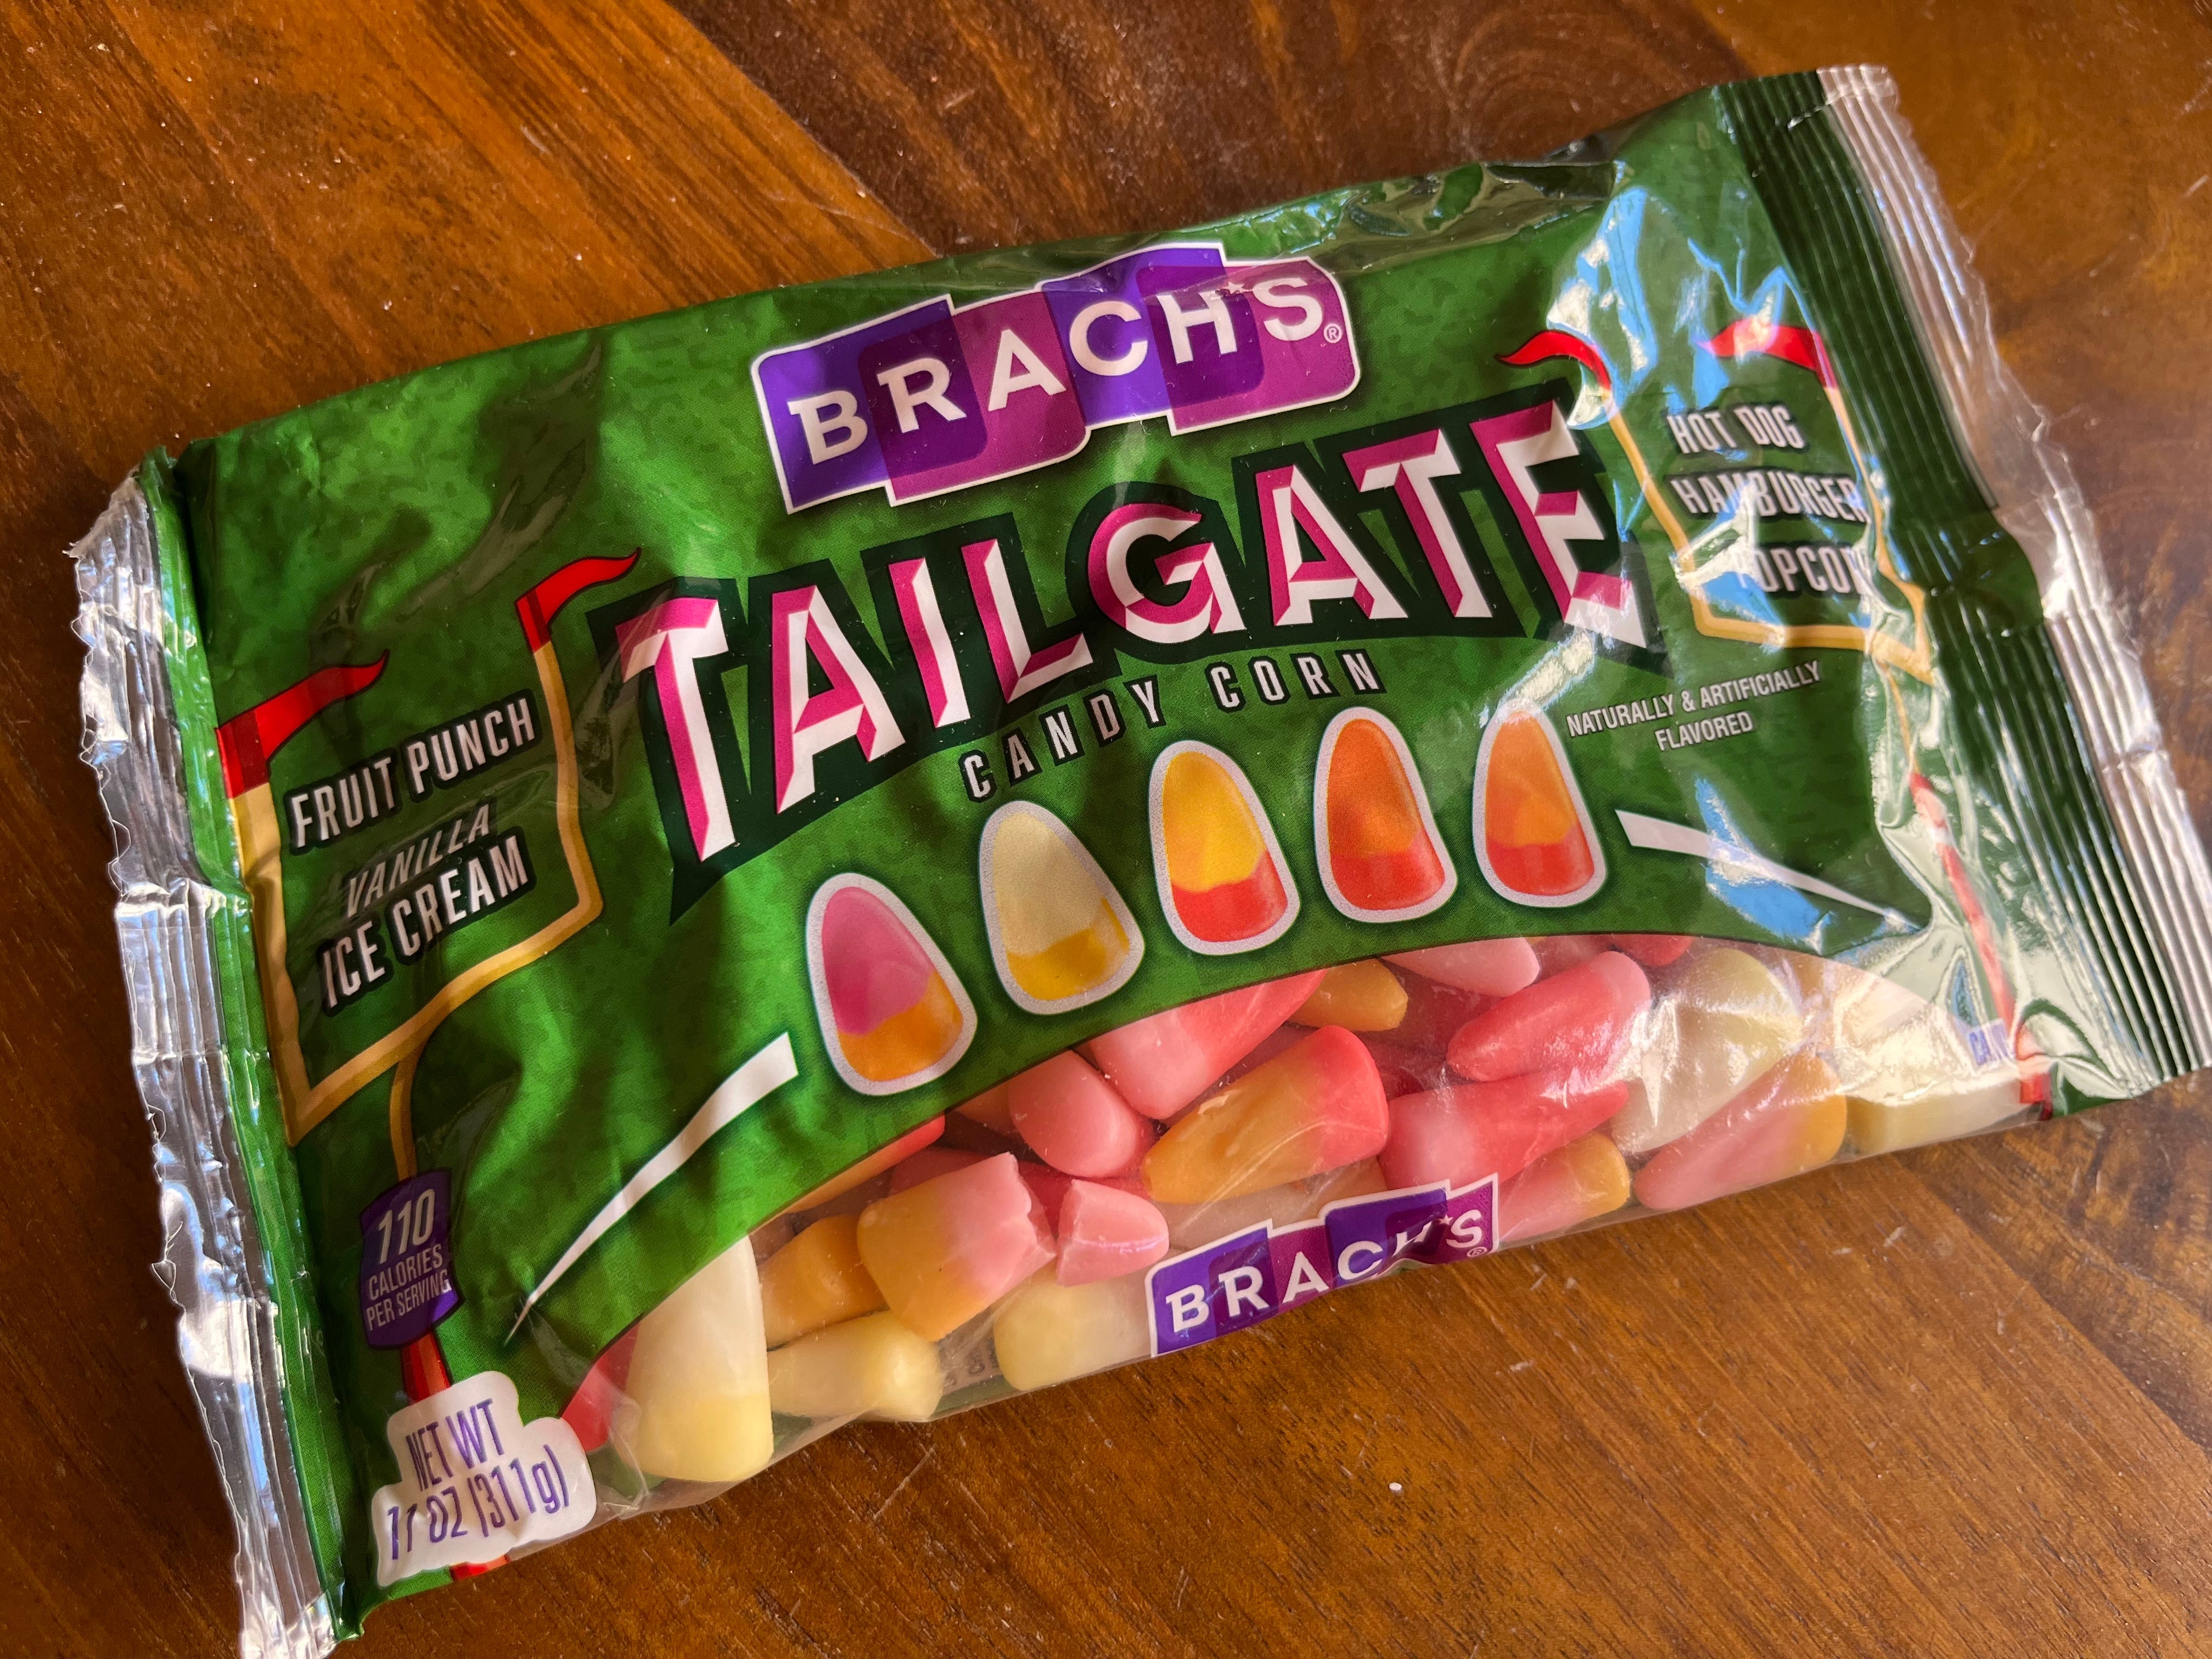 Hot dog-flavored candy? Hamburger, too? Why Tailgate Candy Corn tastes like a mistake